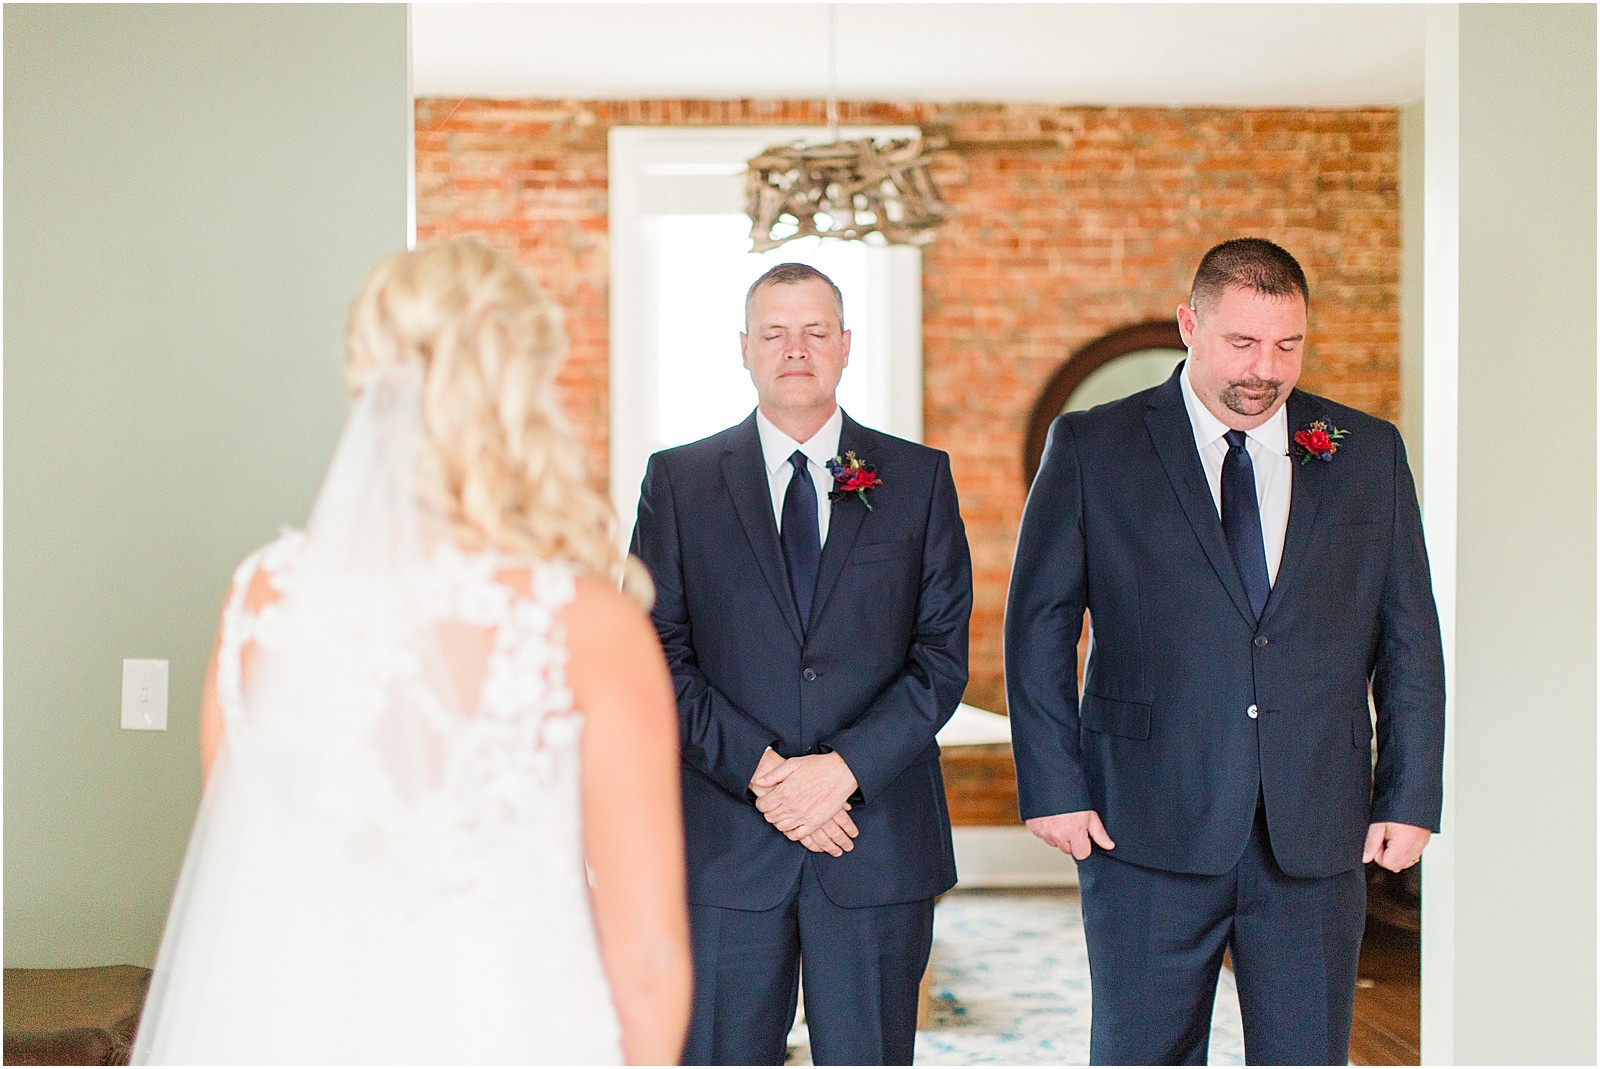 Haylee and Dillon's Evansville, Indiana wedding by Bret and Brandie Photography.0025.jpg